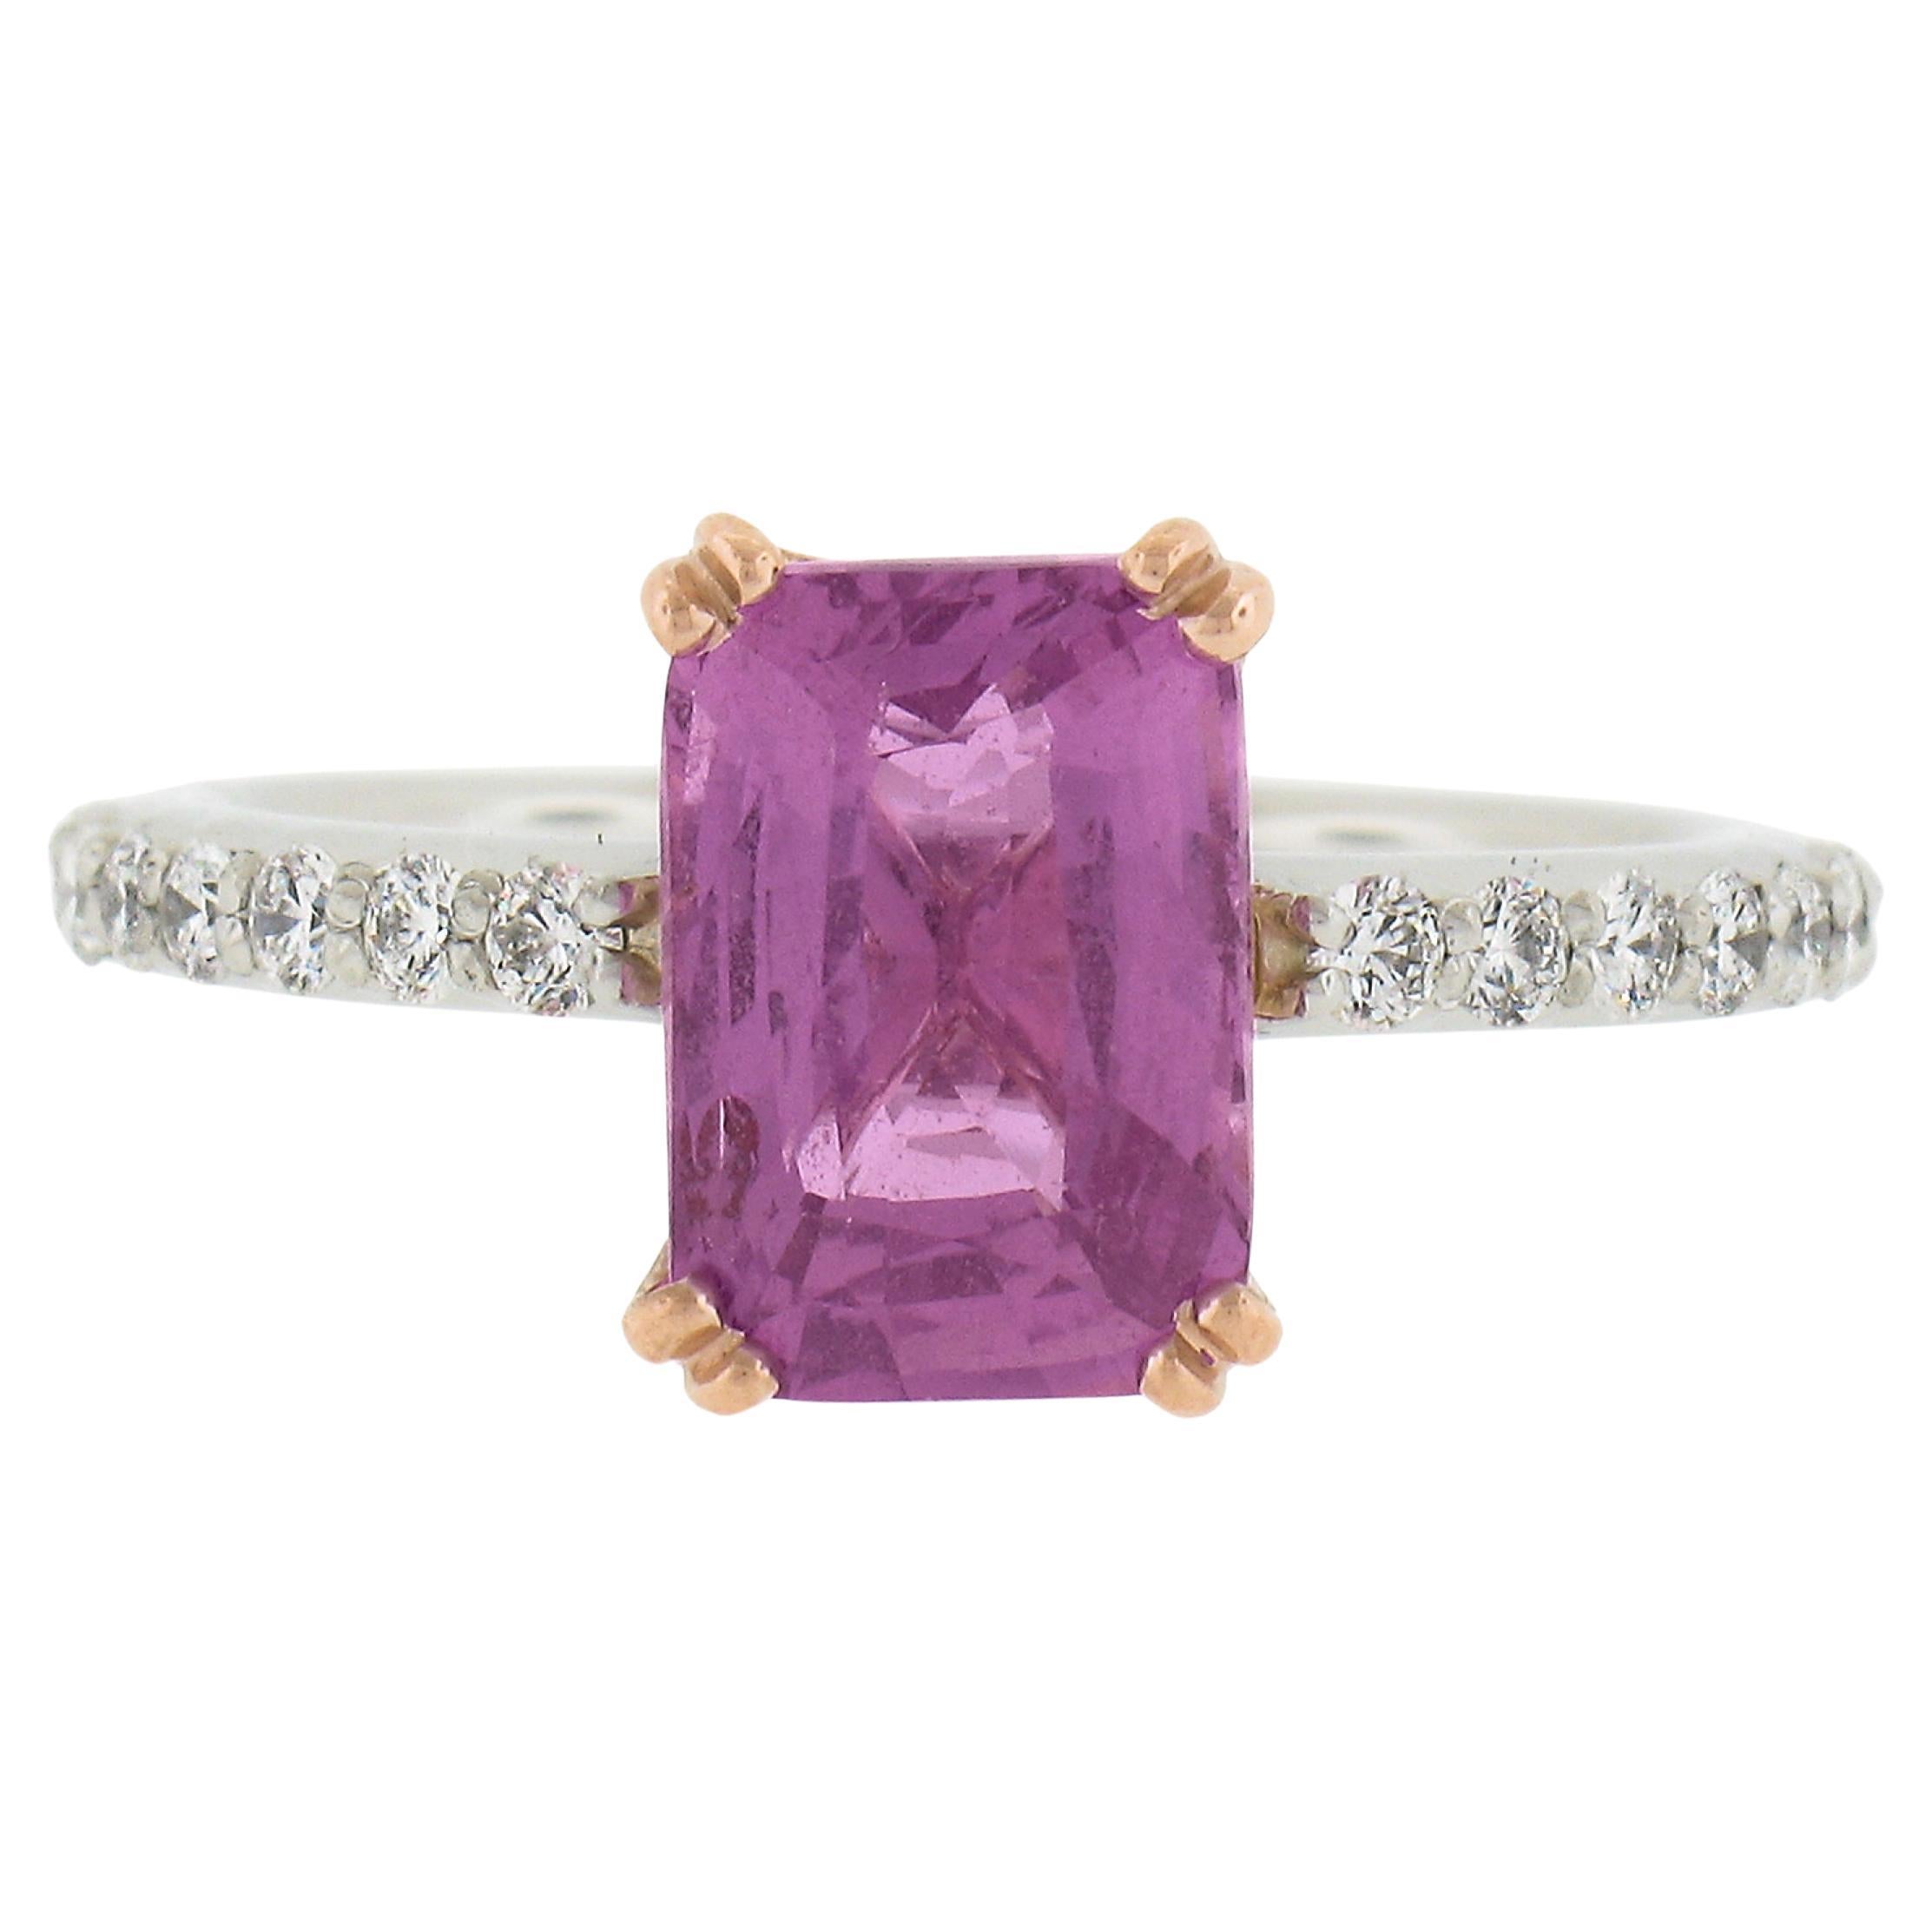 New Platinum & 14k Gold 3.61ct GIA No Heat Pink Sapphire Diamond Solitaire Ring For Sale